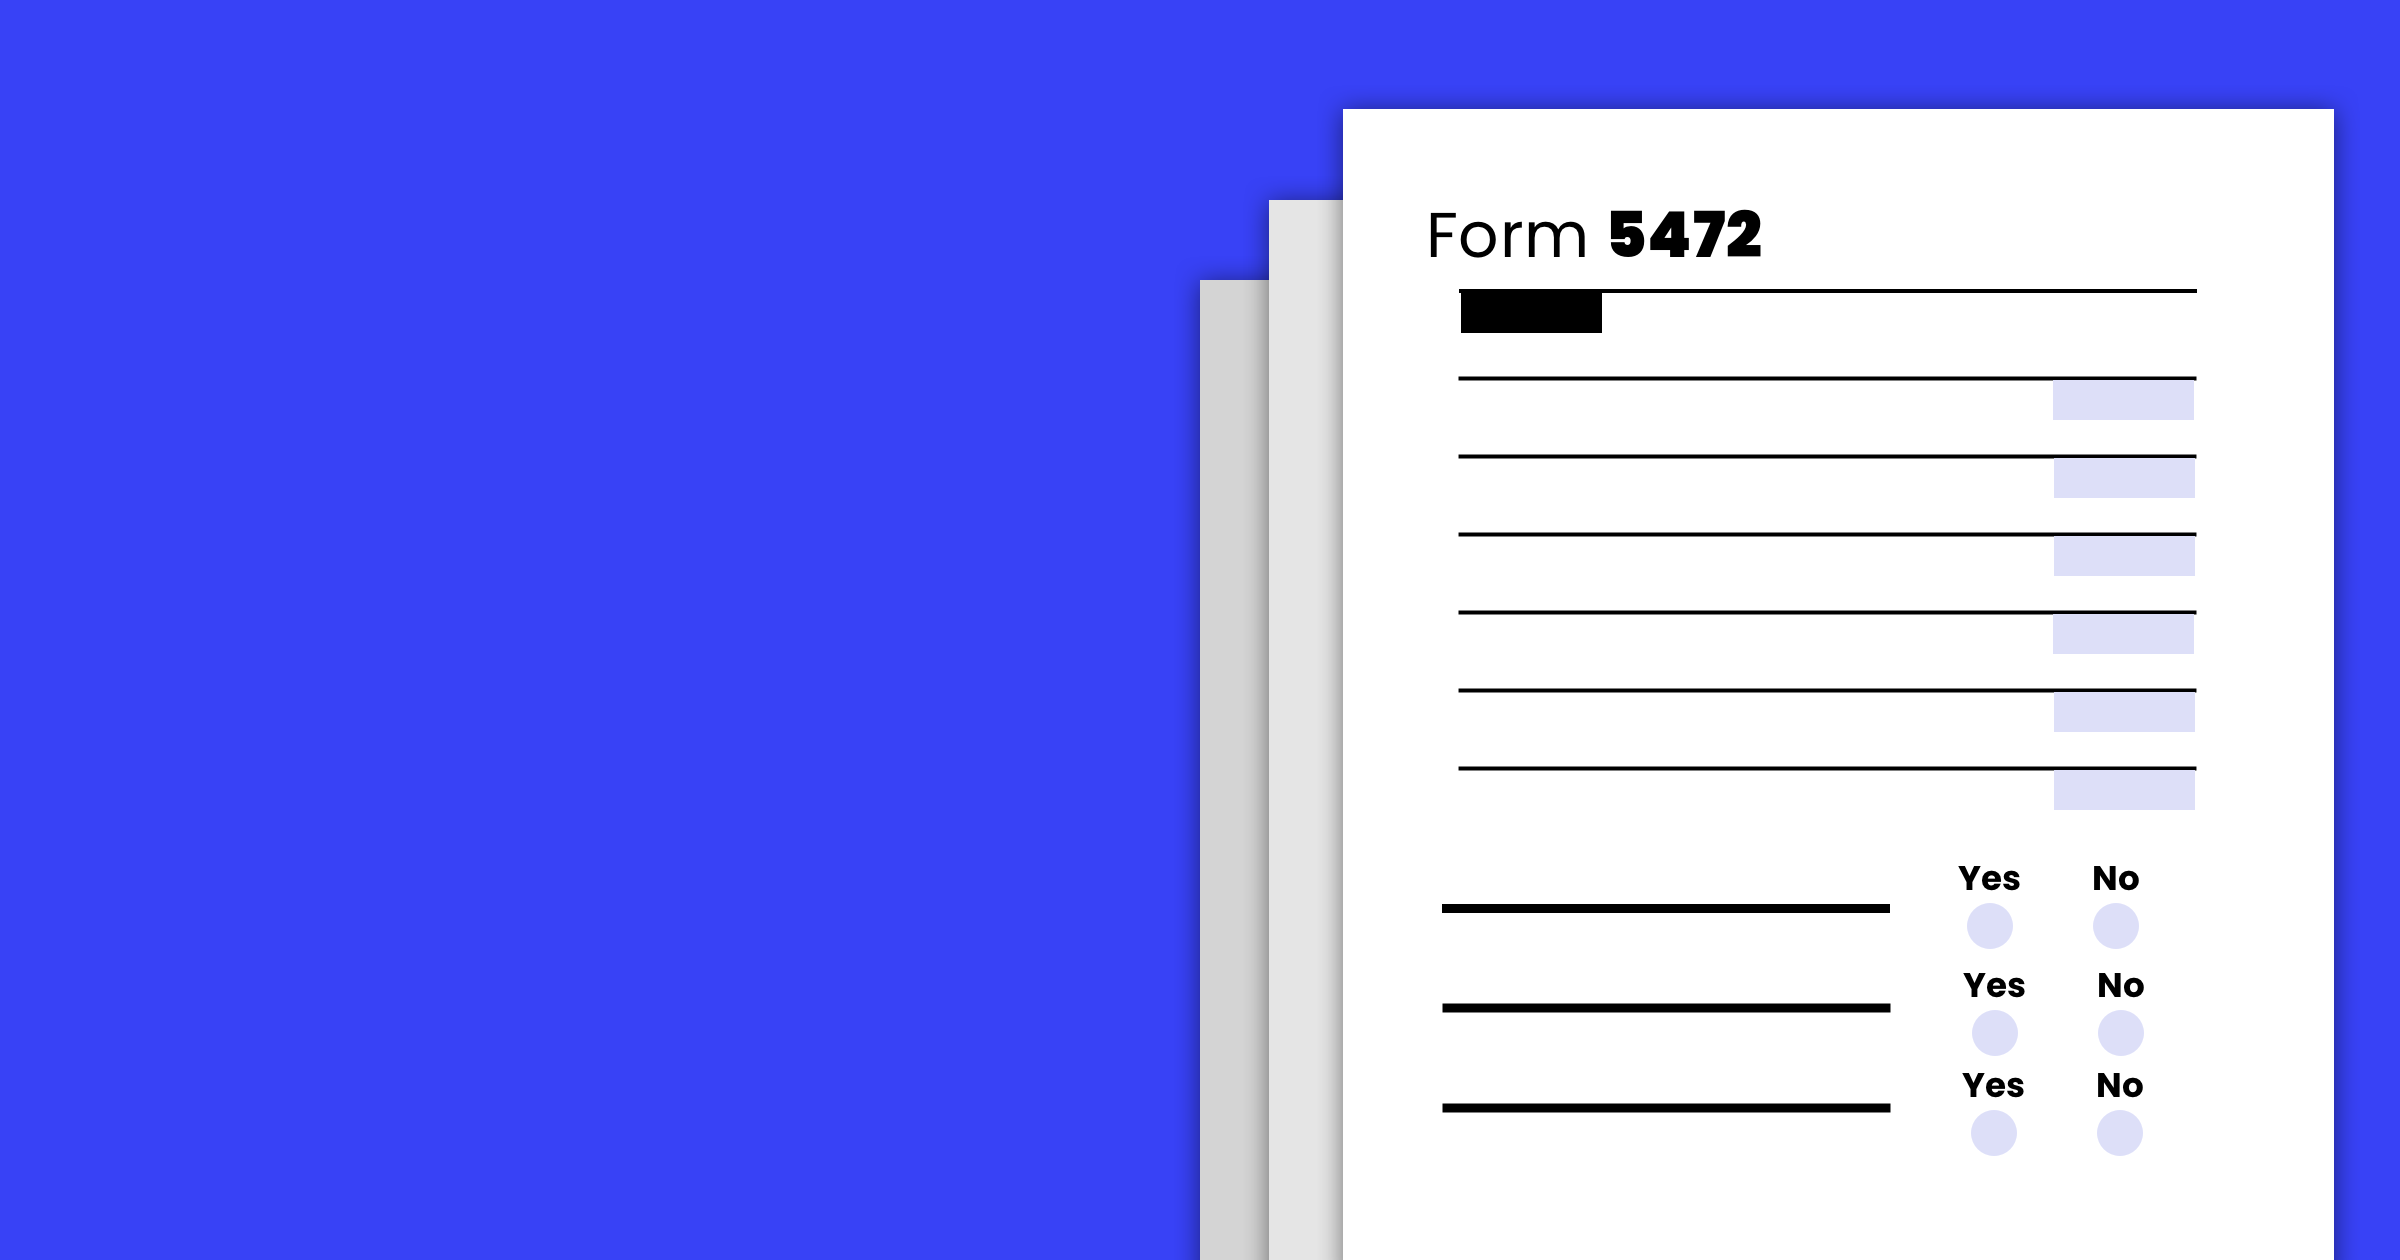 What You Need to Know About Filing IRS Form 5472